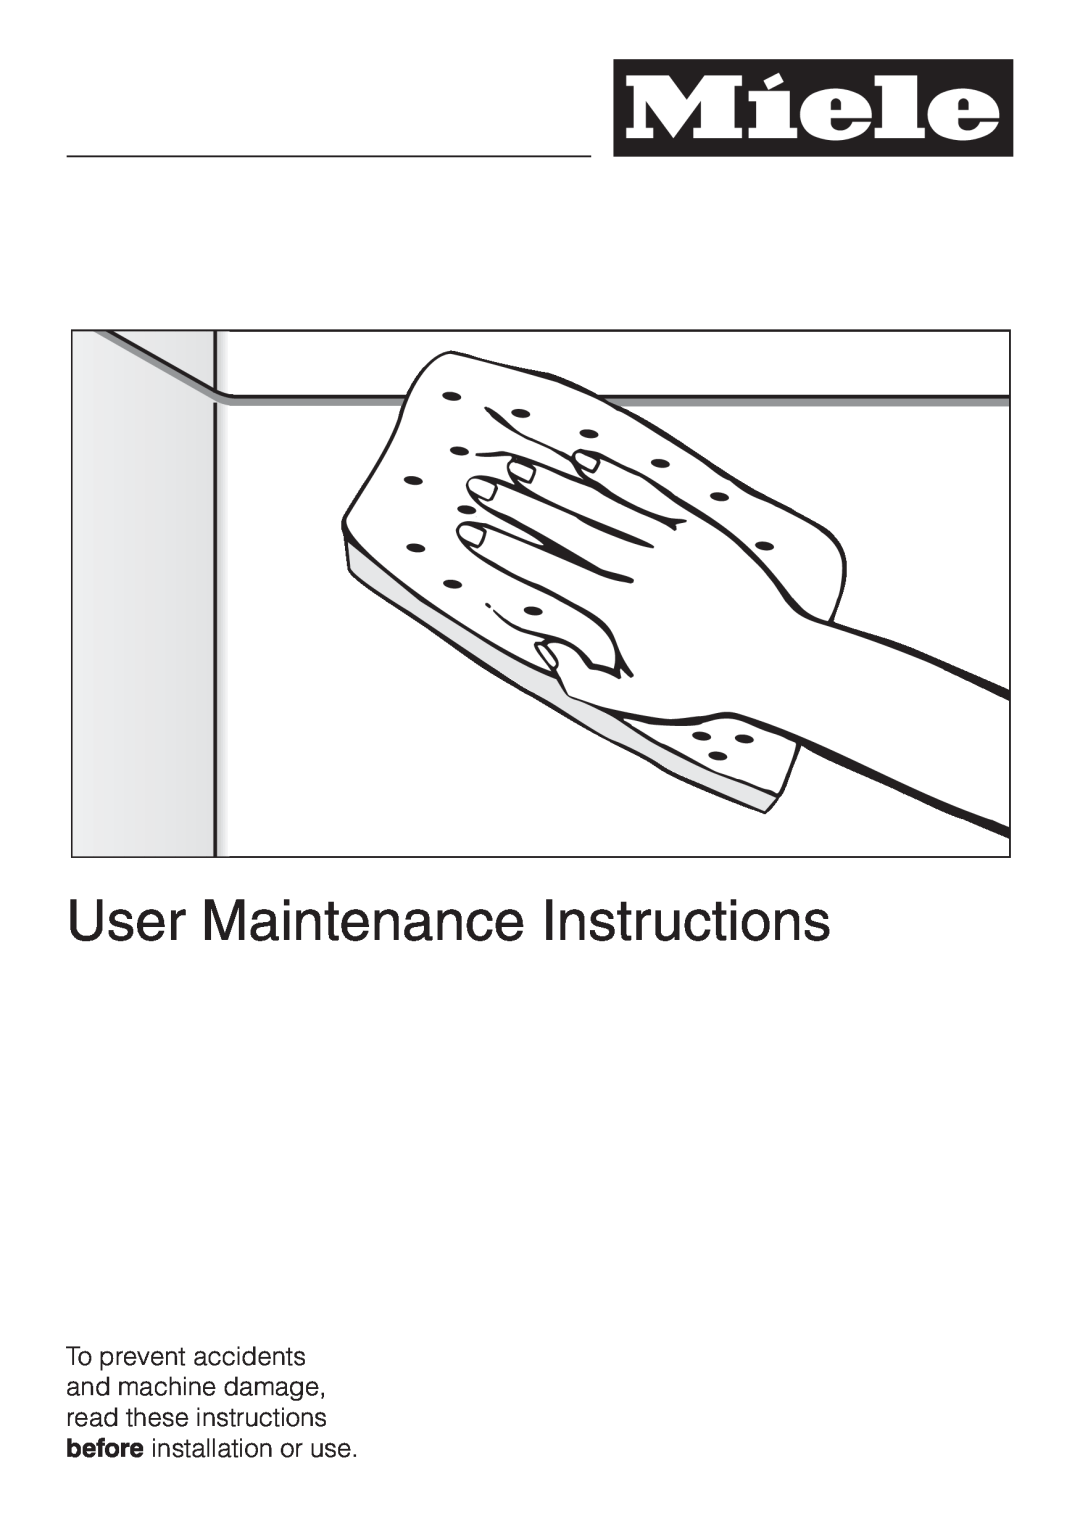 Miele G1470, G2470 operating instructions User Maintenance Instructions 